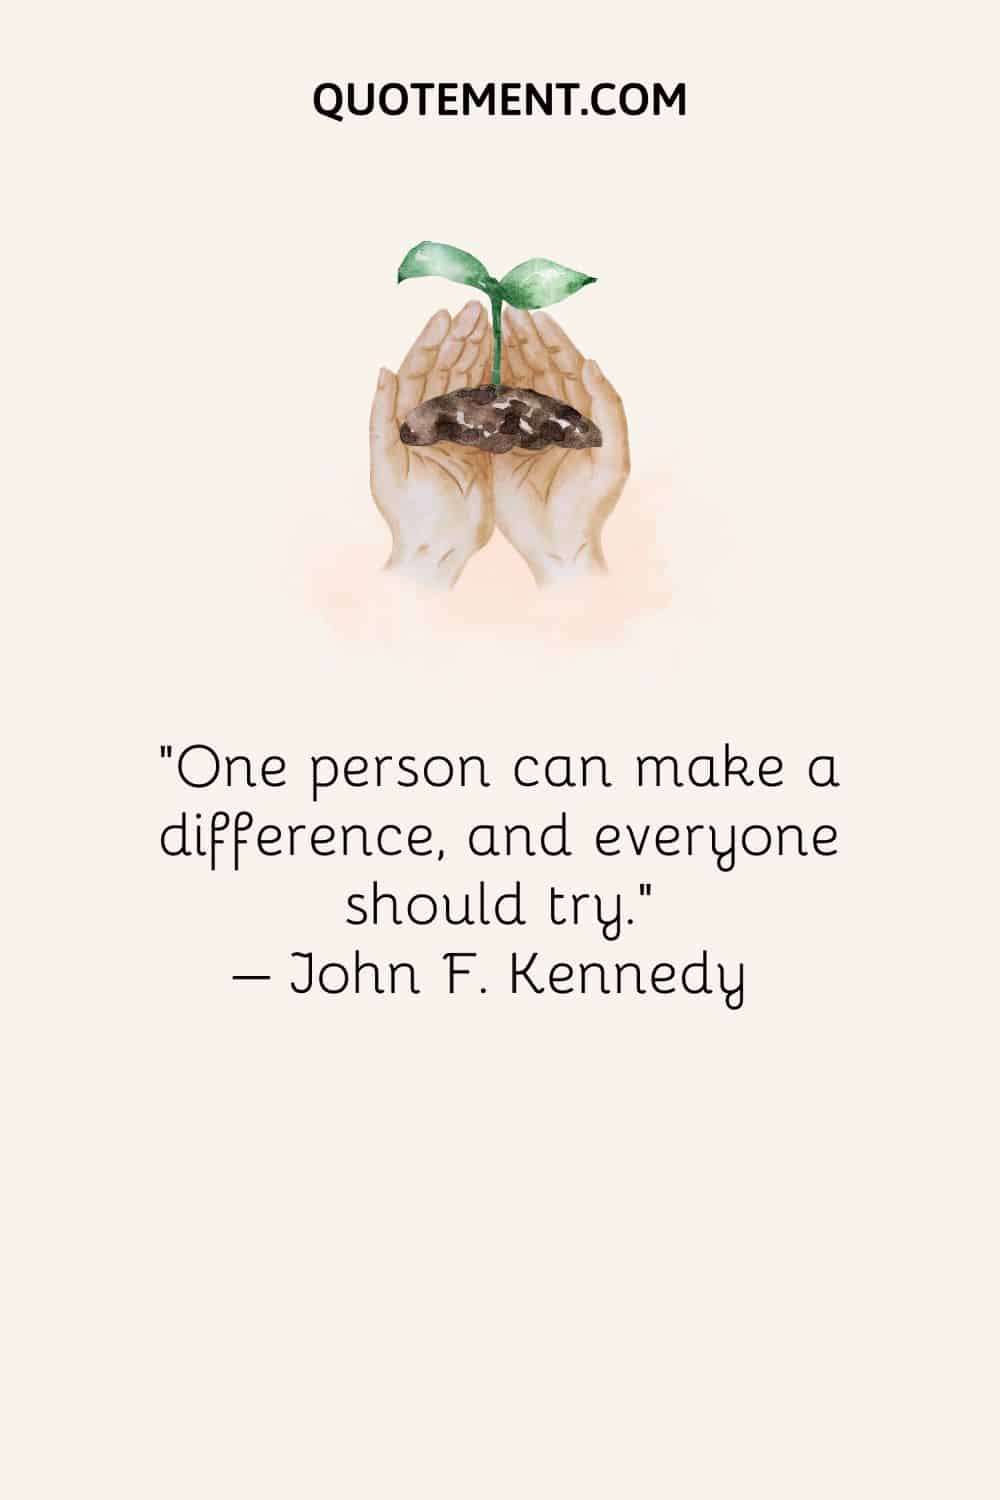 One person can make a difference, and everyone should try.